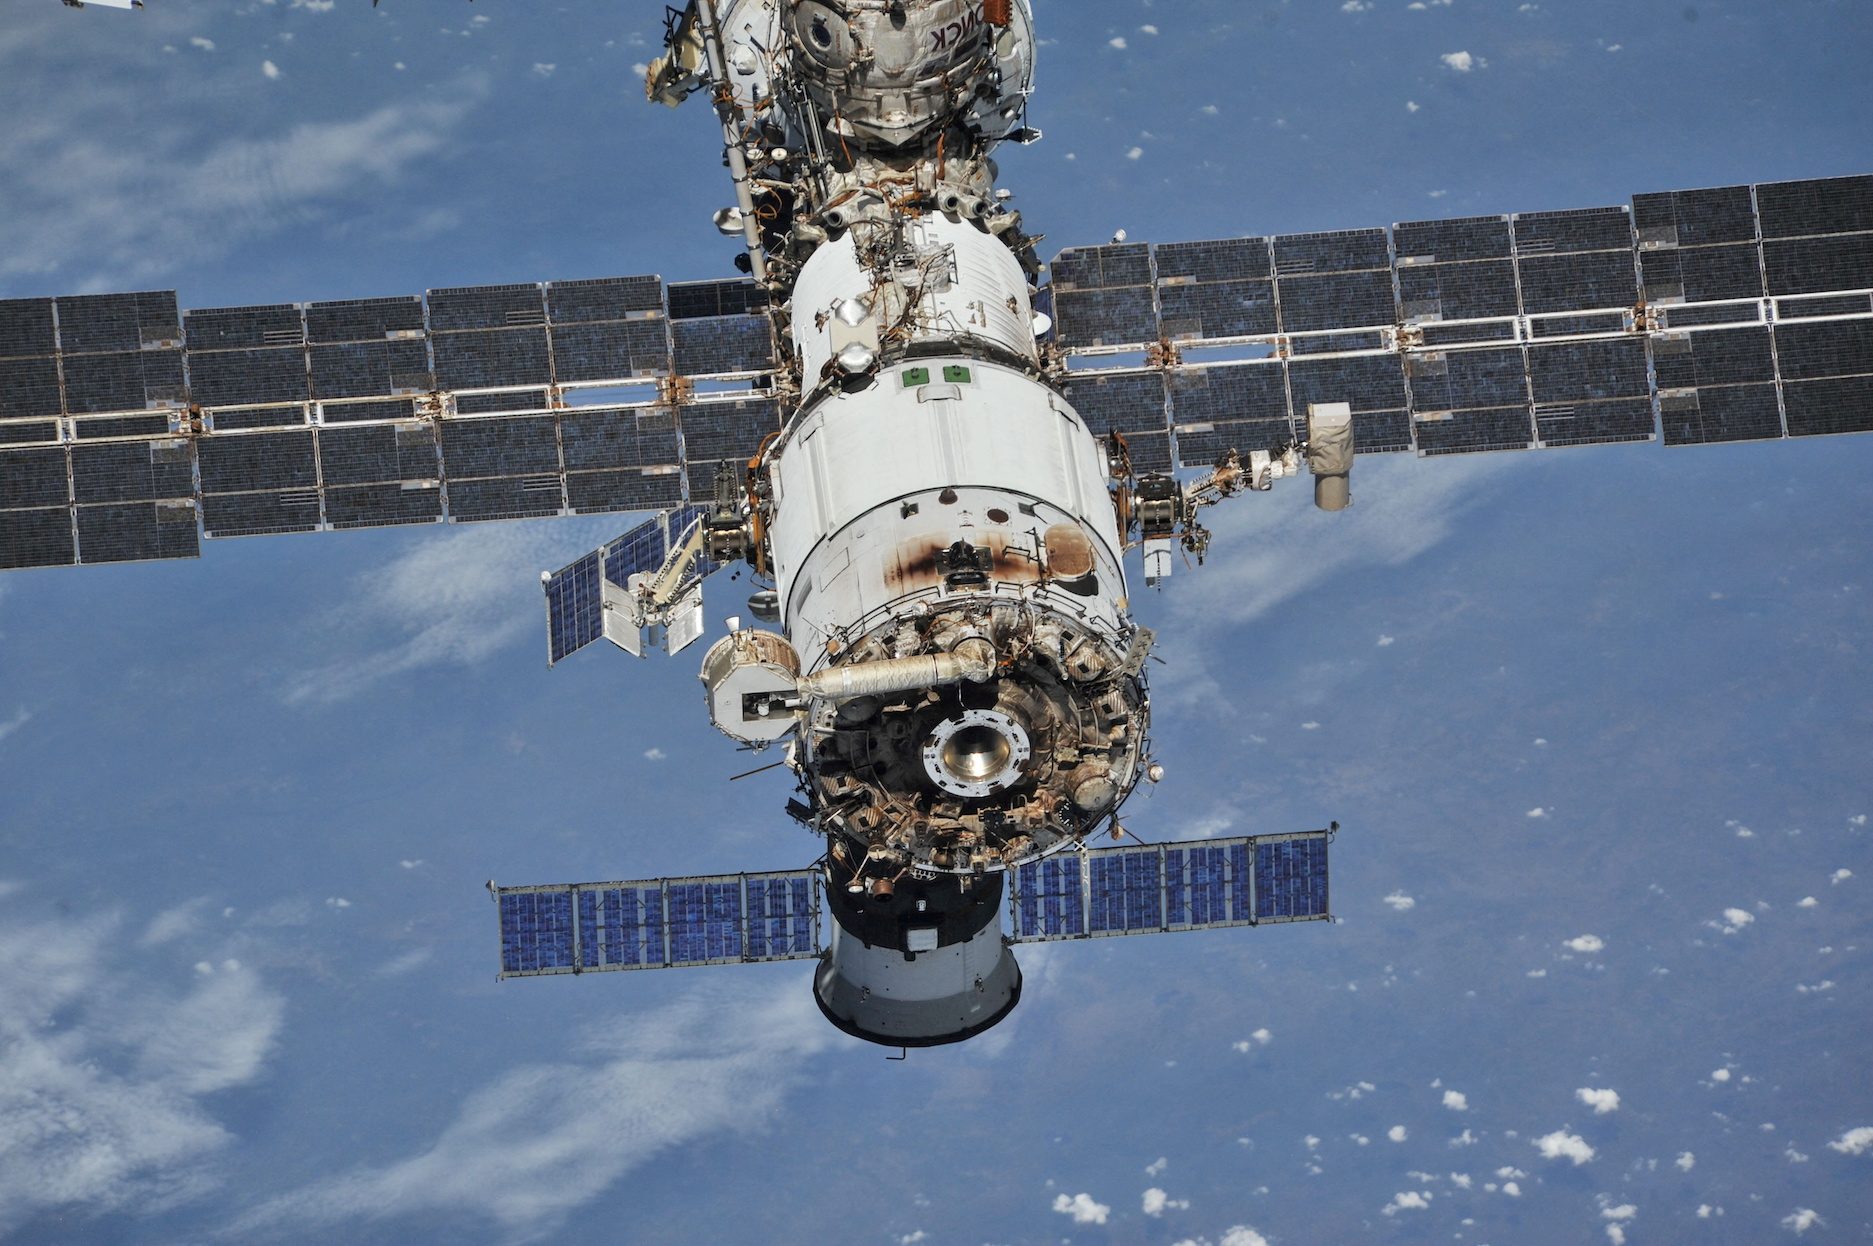 NASA, Russian space agency sign deal to share space station flights – Roscosmos